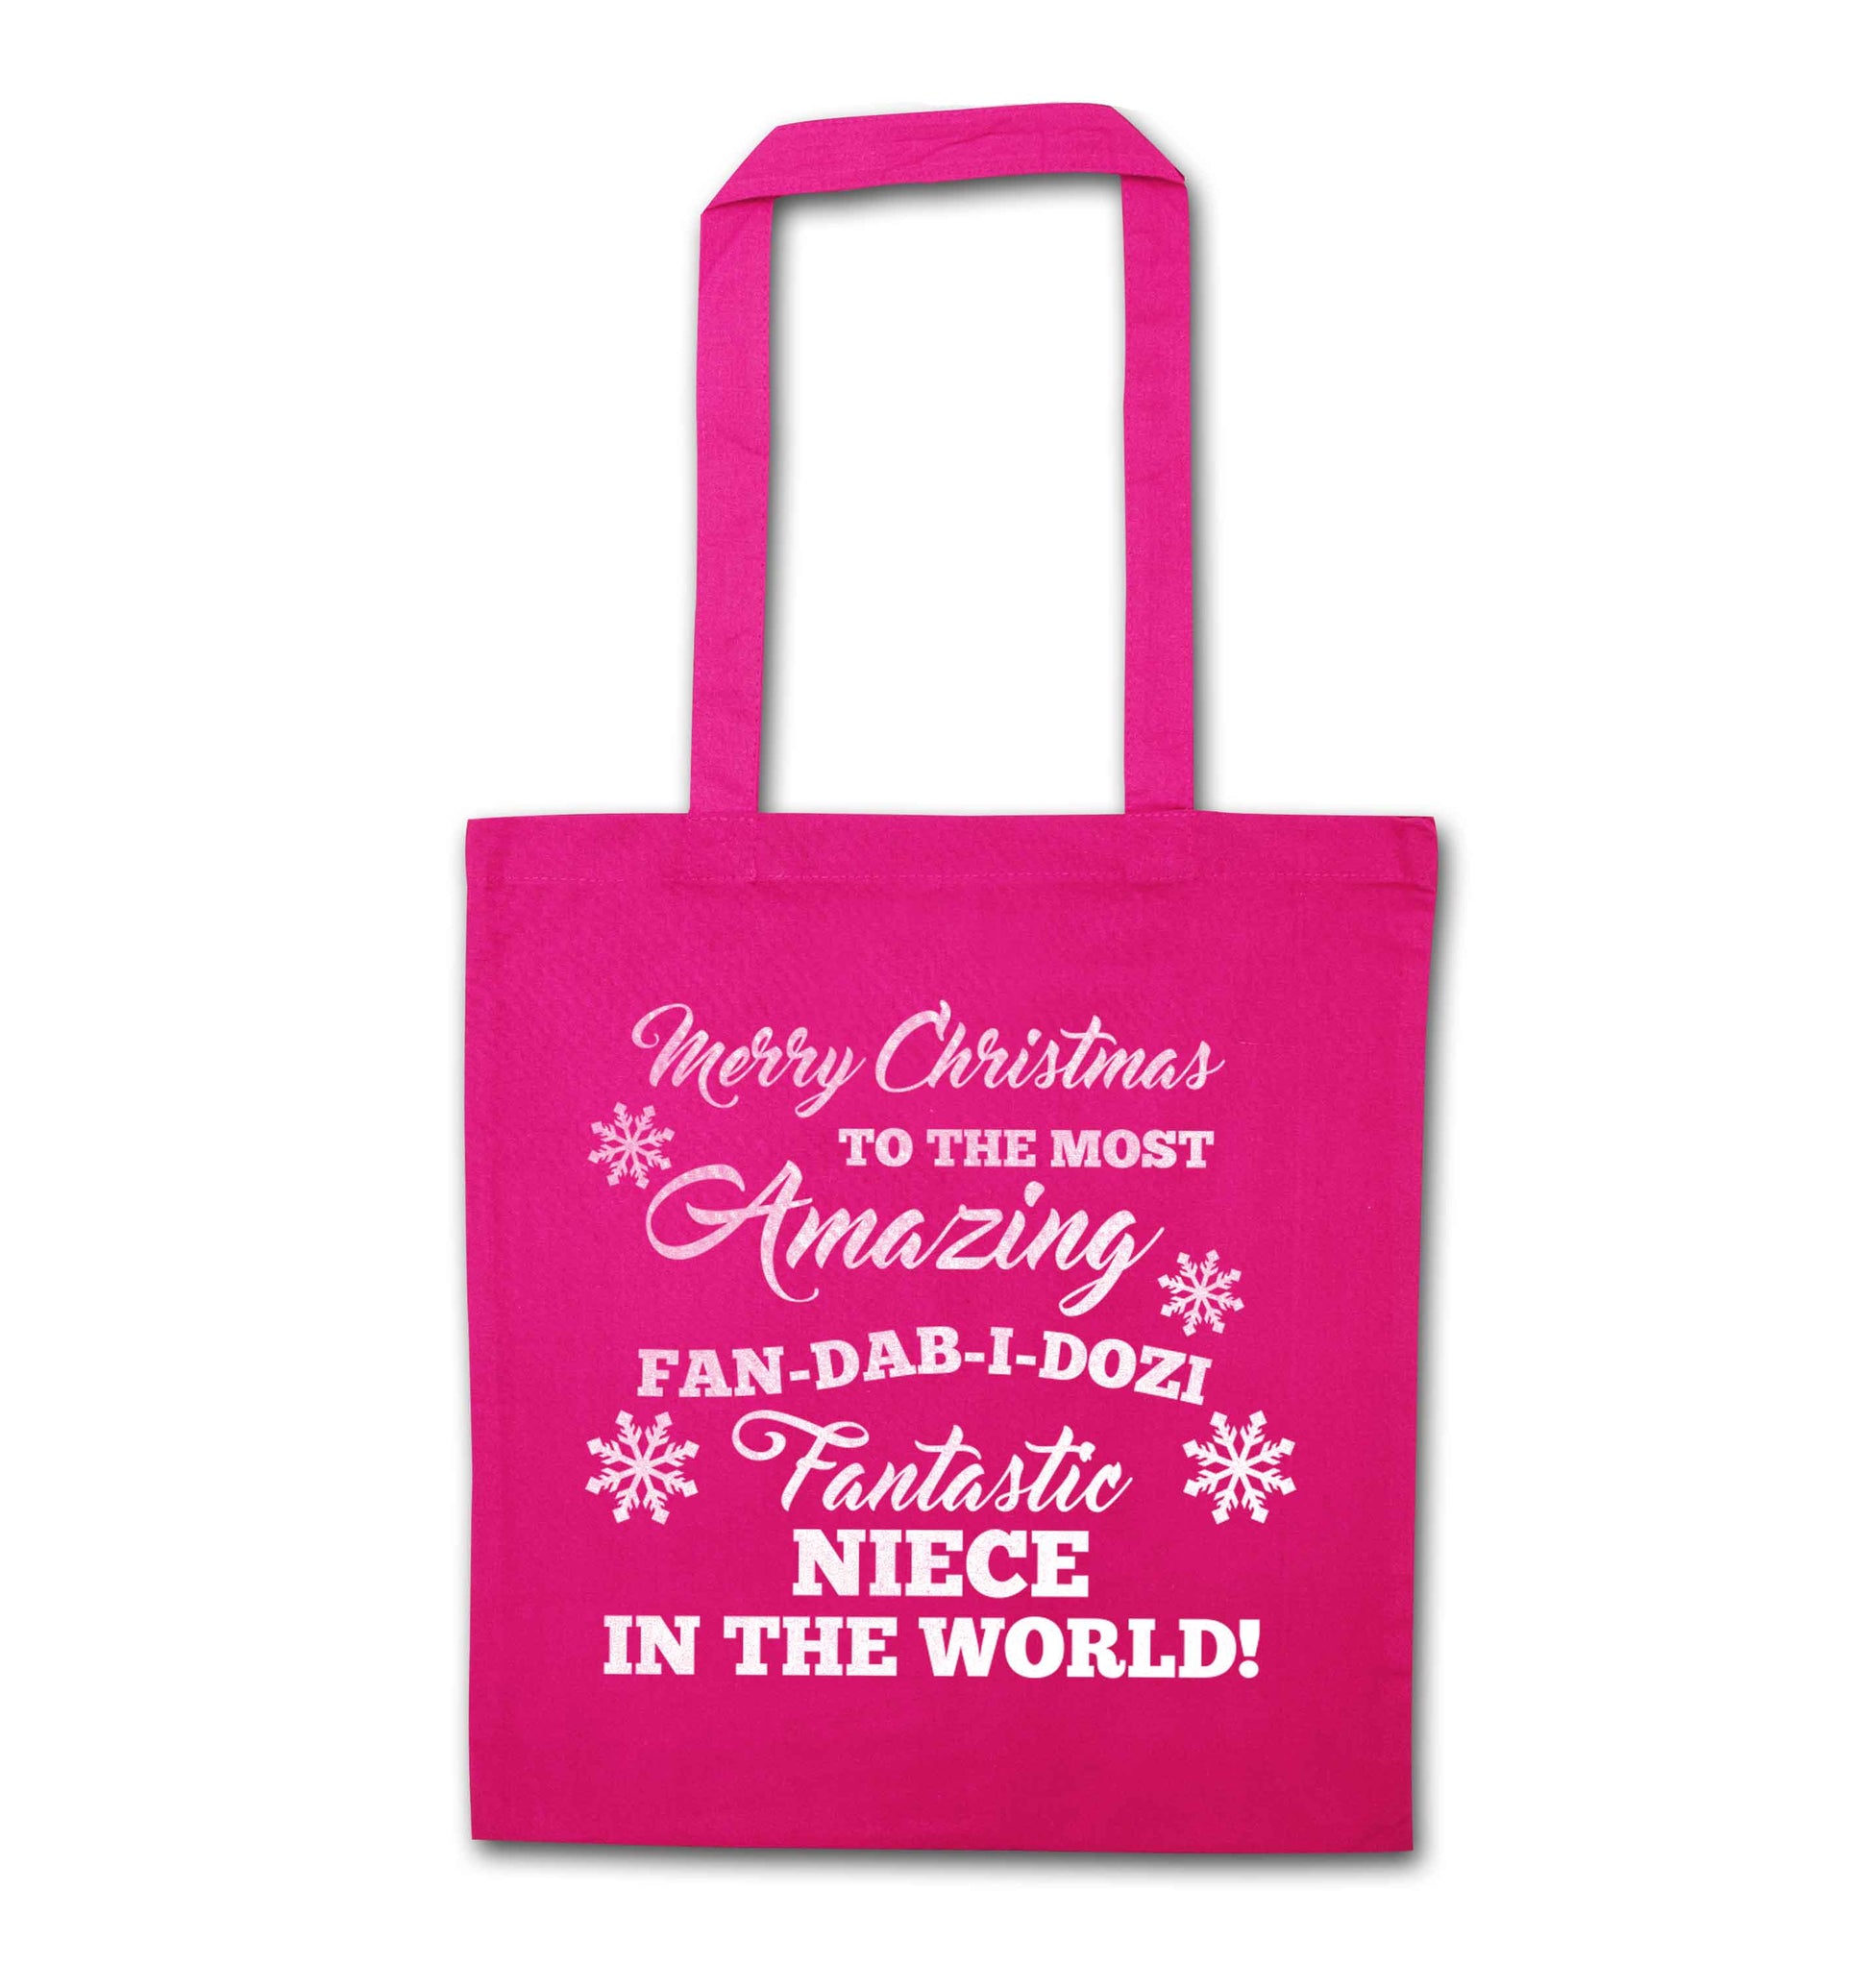 Merry Christmas to the most amazing fan-dab-i-dozi fantasic Niece in the world pink tote bag